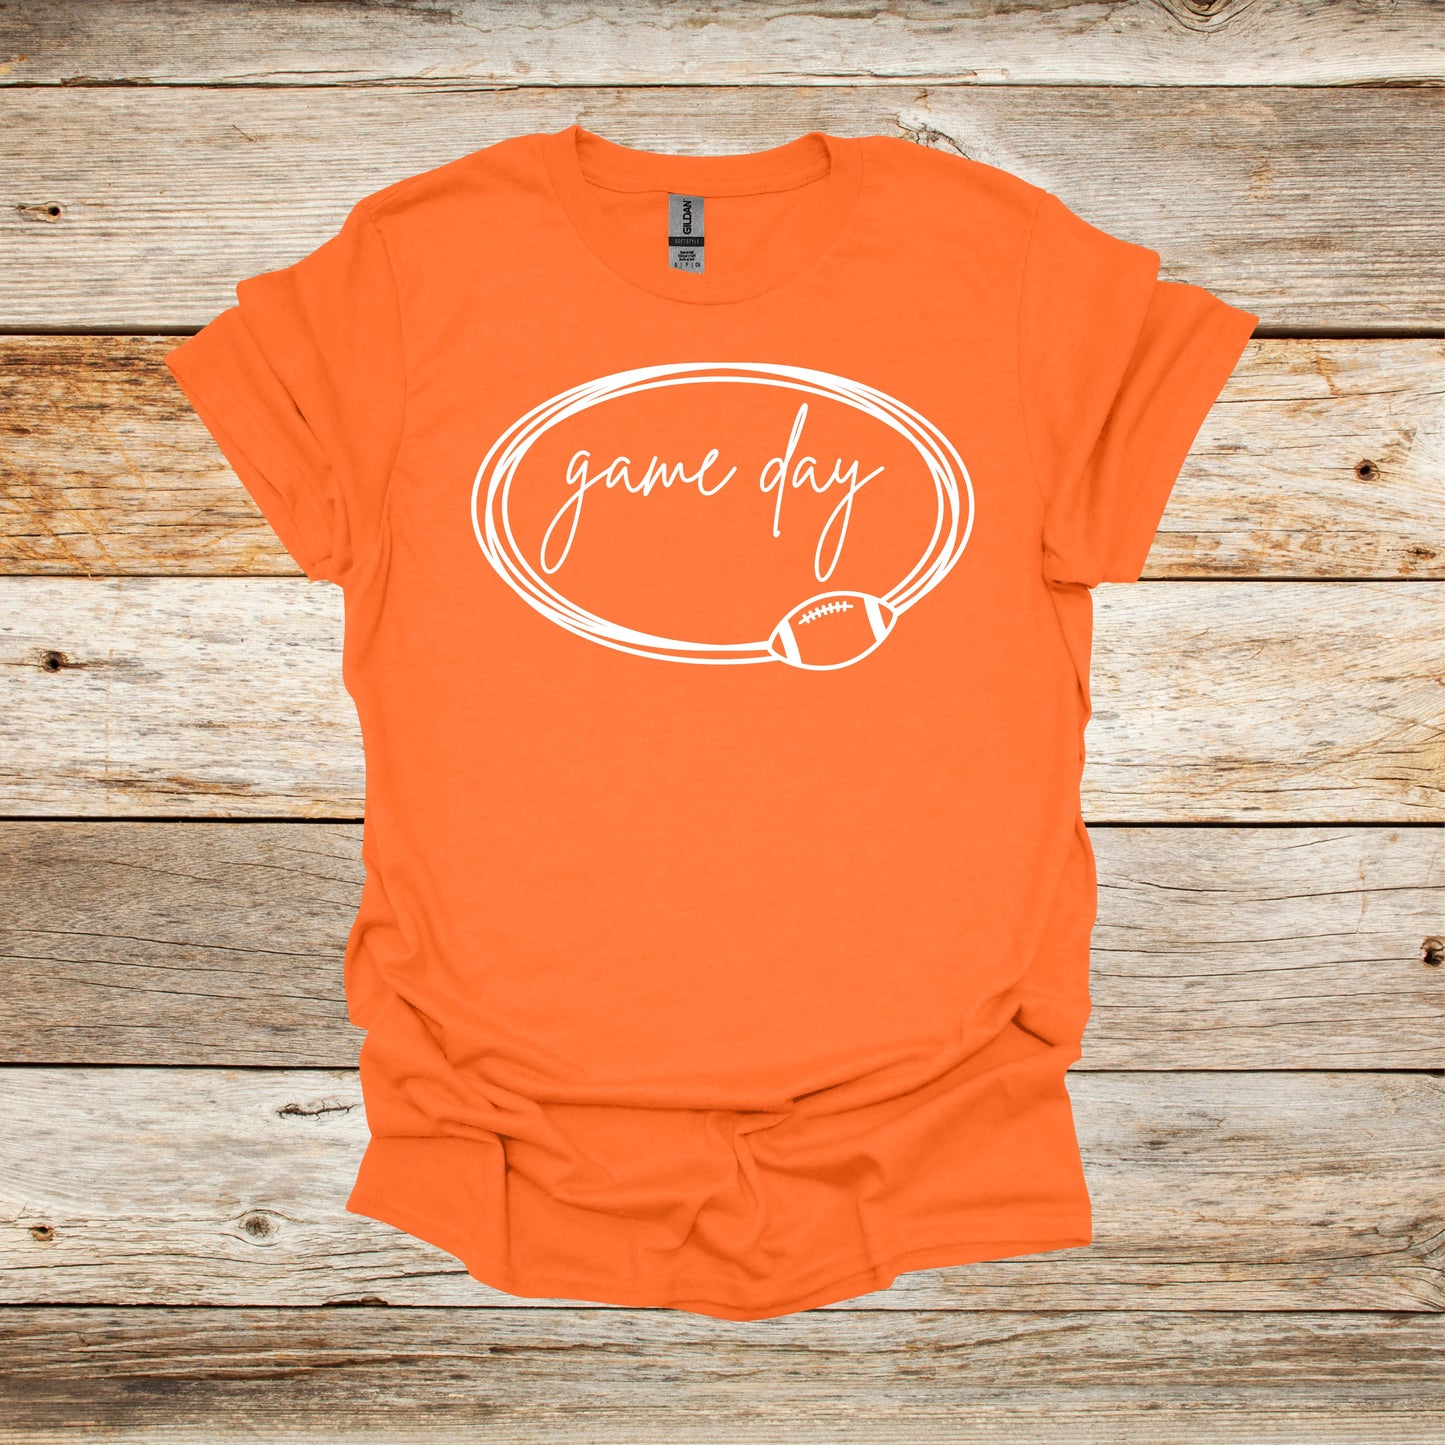 Football T-Shirt - Adult and Children's Tee Shirts - Game Day - Sports T-Shirts Graphic Avenue Orange Adult Small 